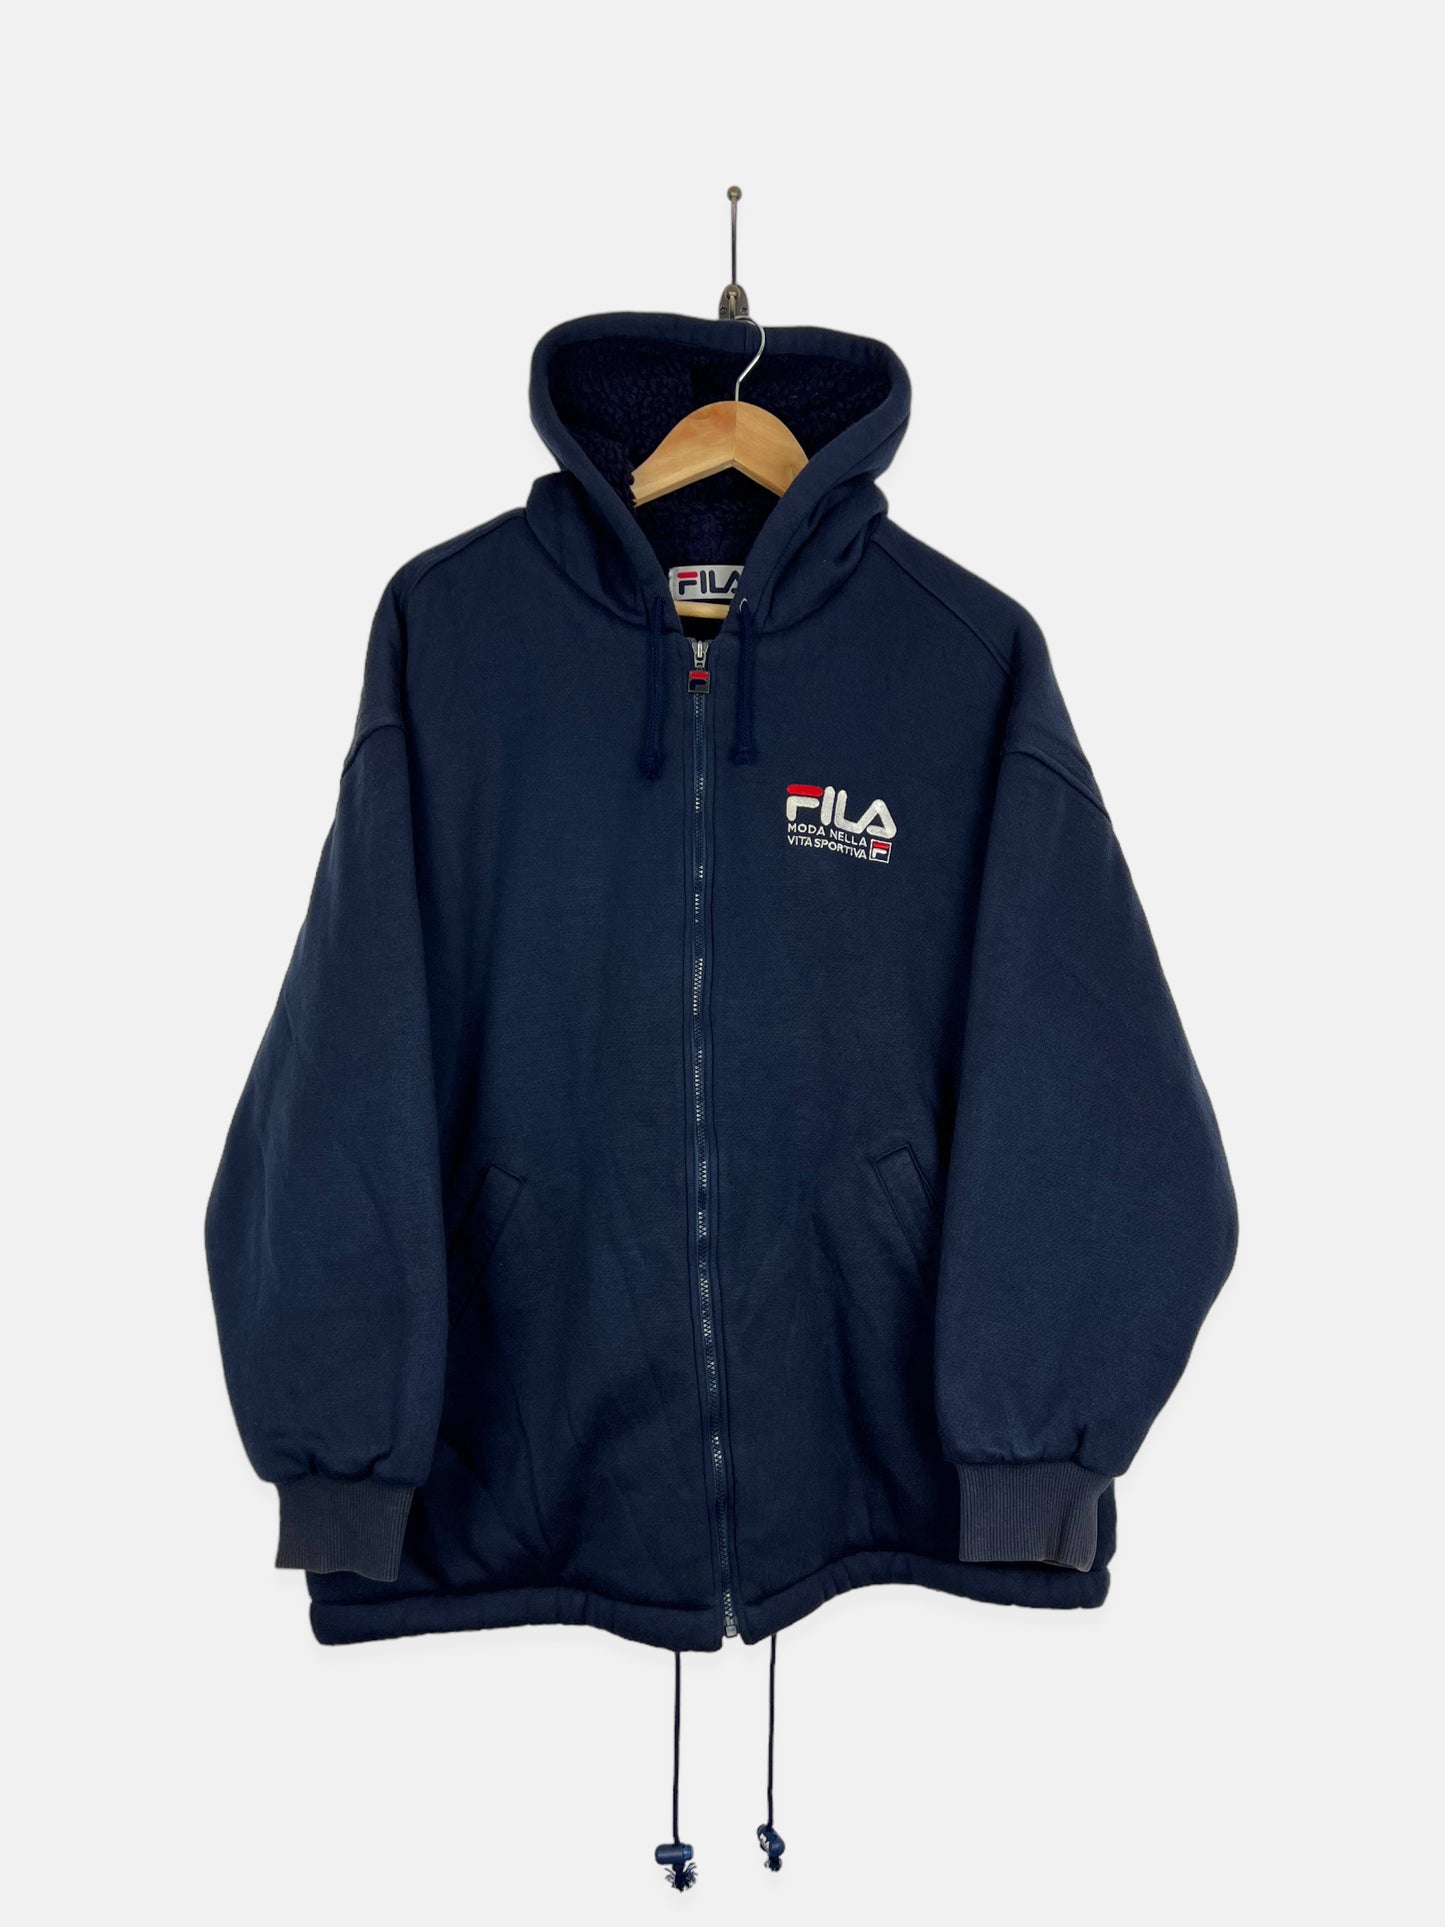 90's Fila Sherpa Lined Embroidered Vintage Zip-Up Hoodie Size L